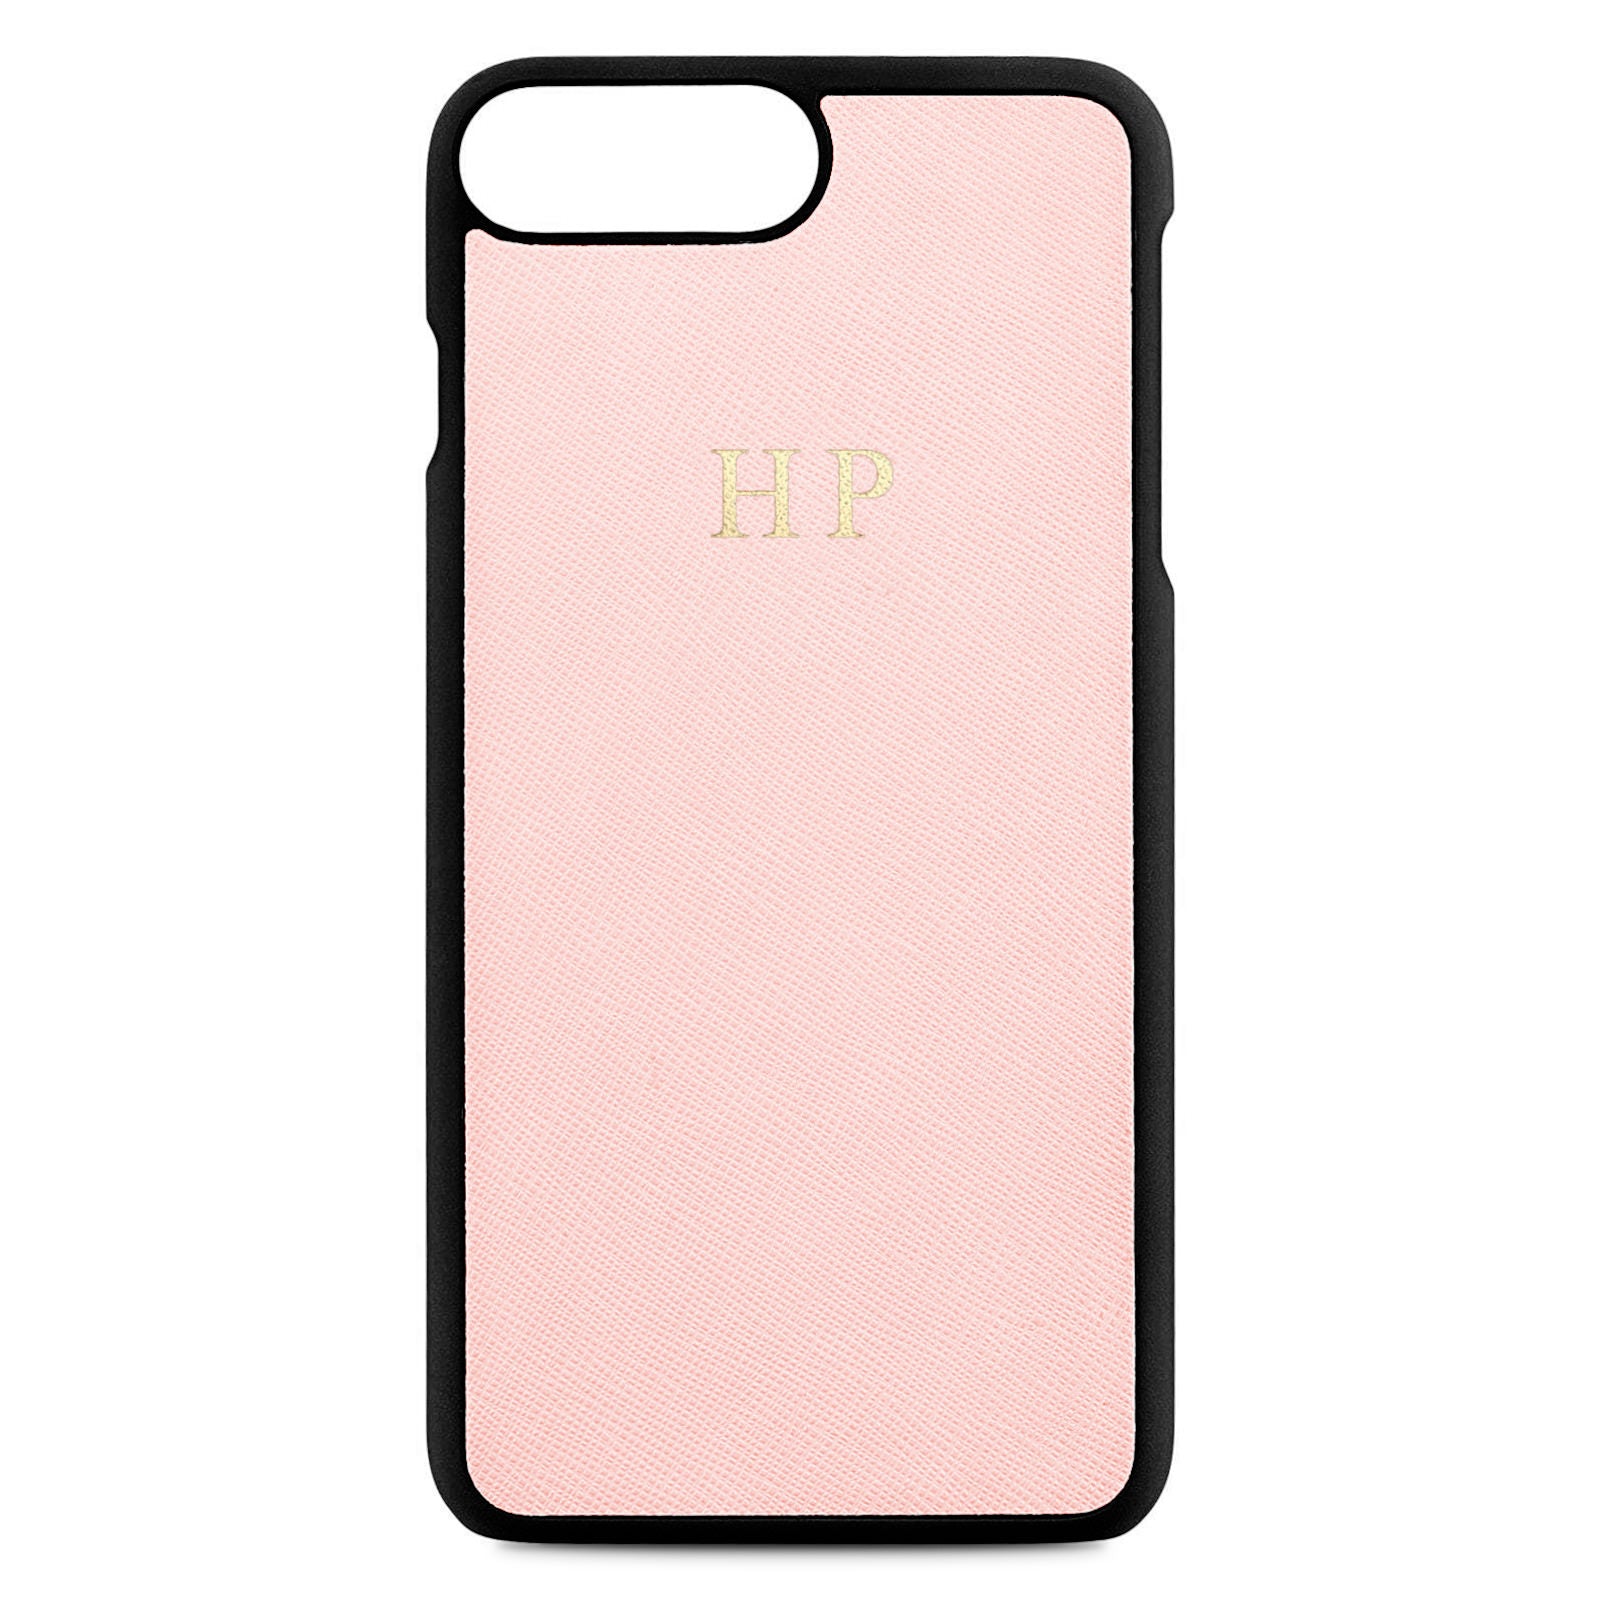 Personalised Pink Saffiano Leather iPhone 8 Plus Case